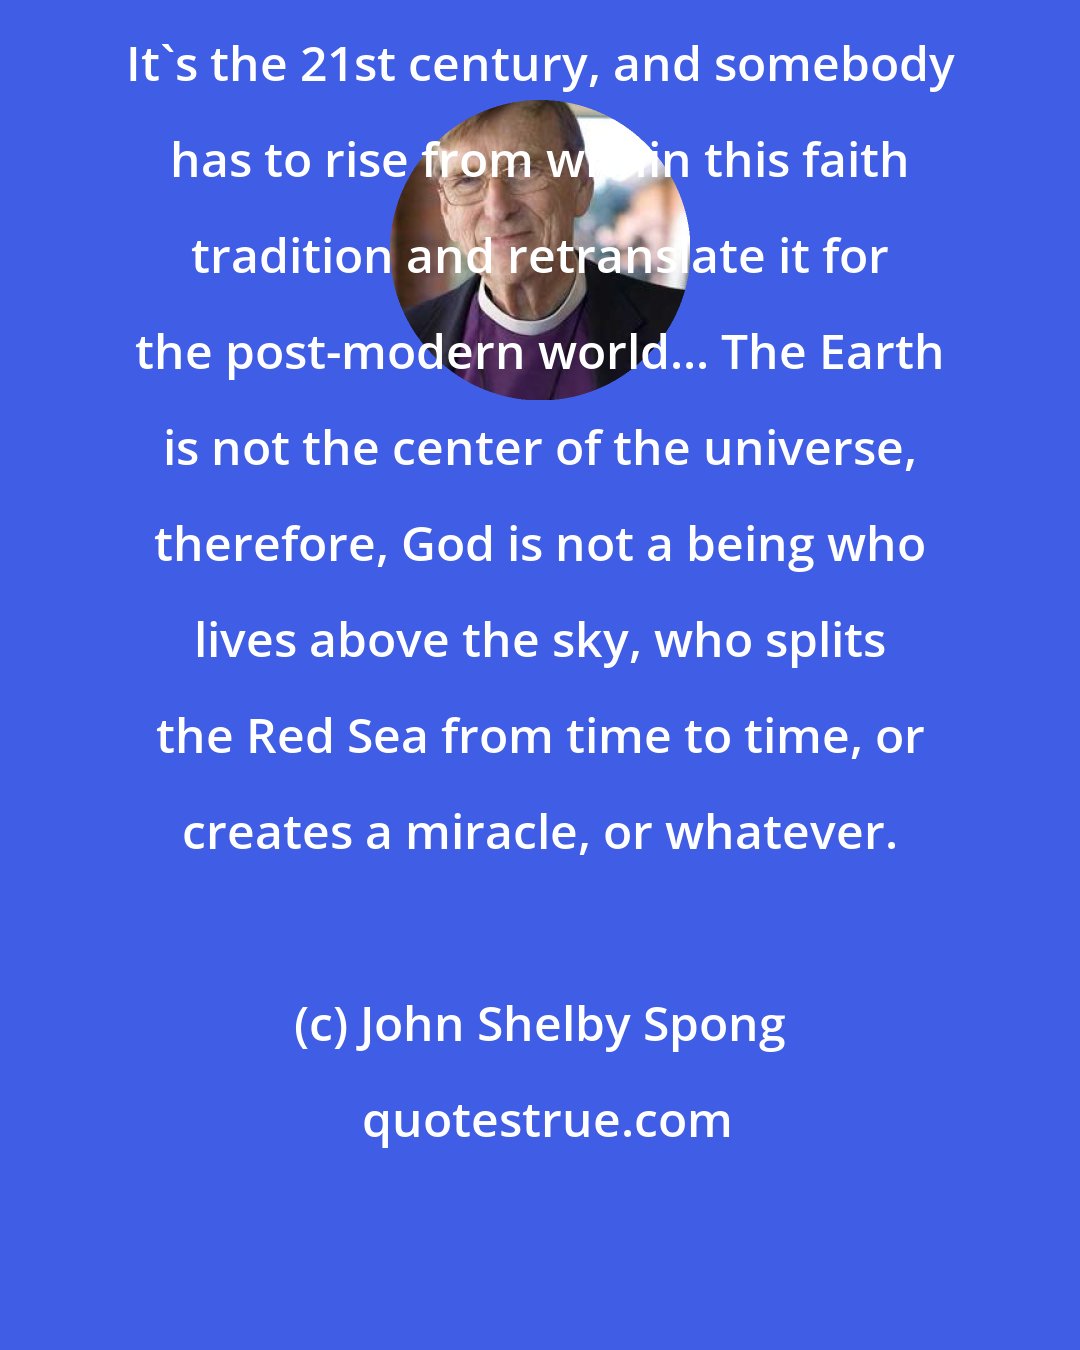 John Shelby Spong: It's the 21st century, and somebody has to rise from within this faith tradition and retranslate it for the post-modern world... The Earth is not the center of the universe, therefore, God is not a being who lives above the sky, who splits the Red Sea from time to time, or creates a miracle, or whatever.